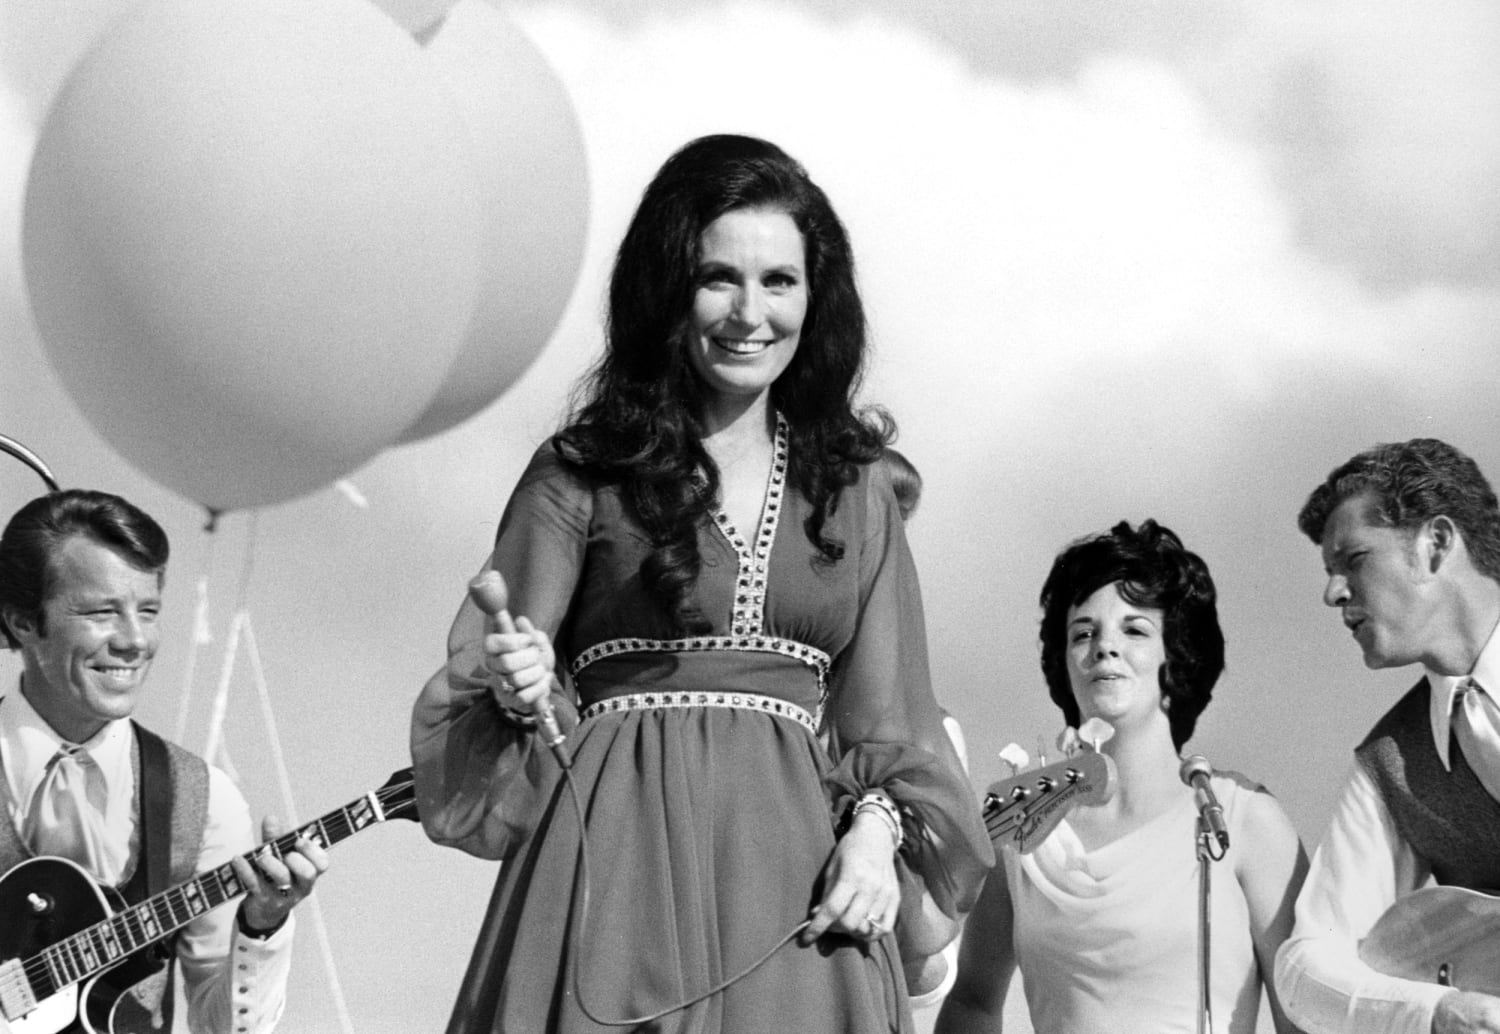 Loretta Lynn, Country Music Star and Symbol of Rural Resilience, Dies at 90